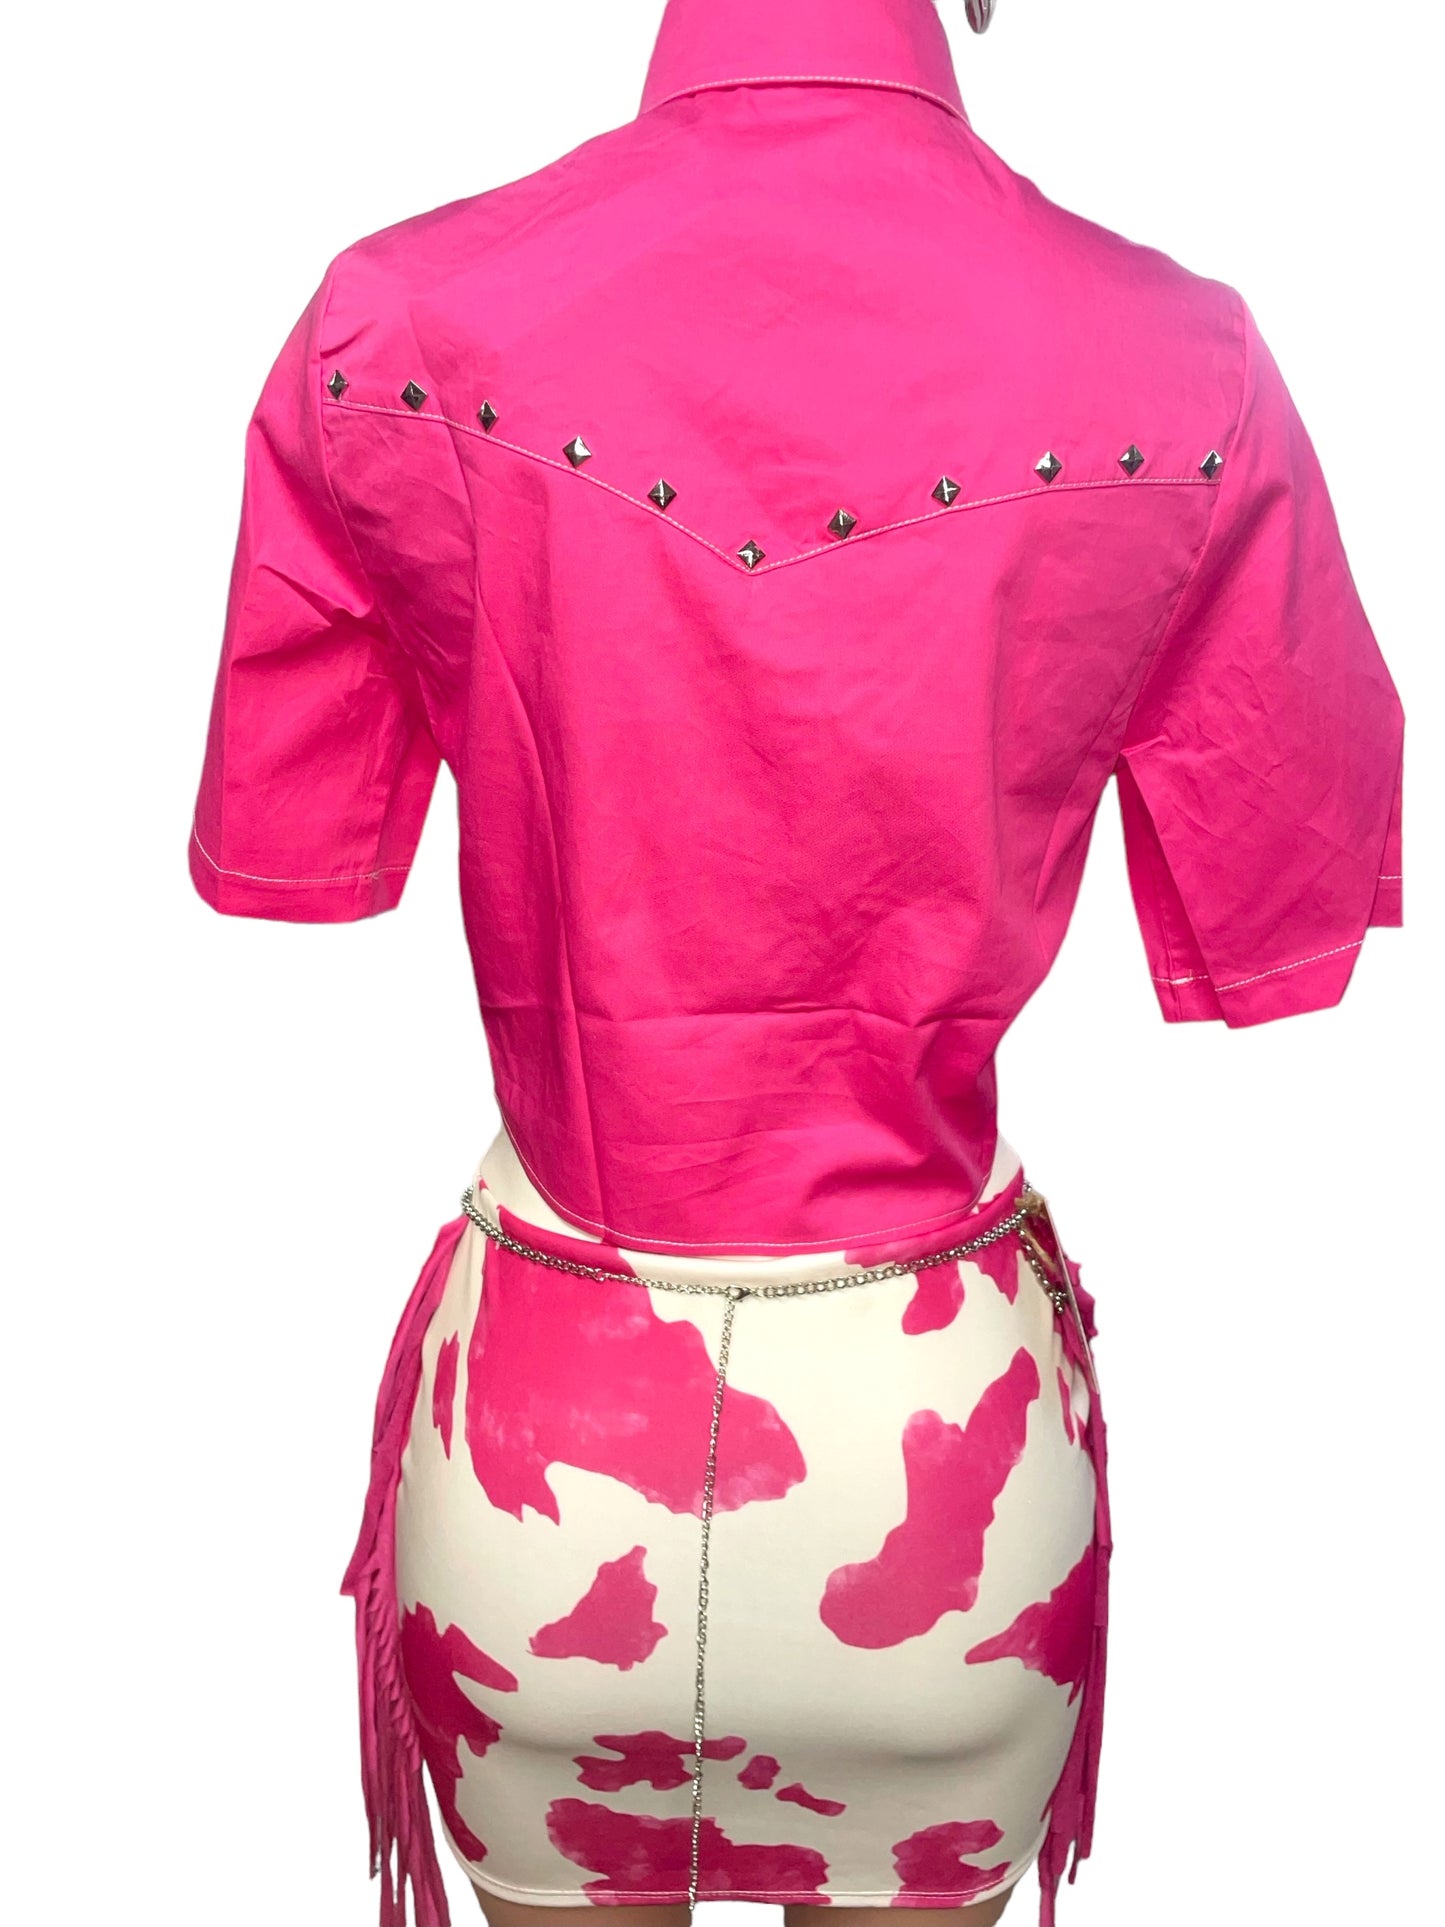 The Pinky Western Studded Crop